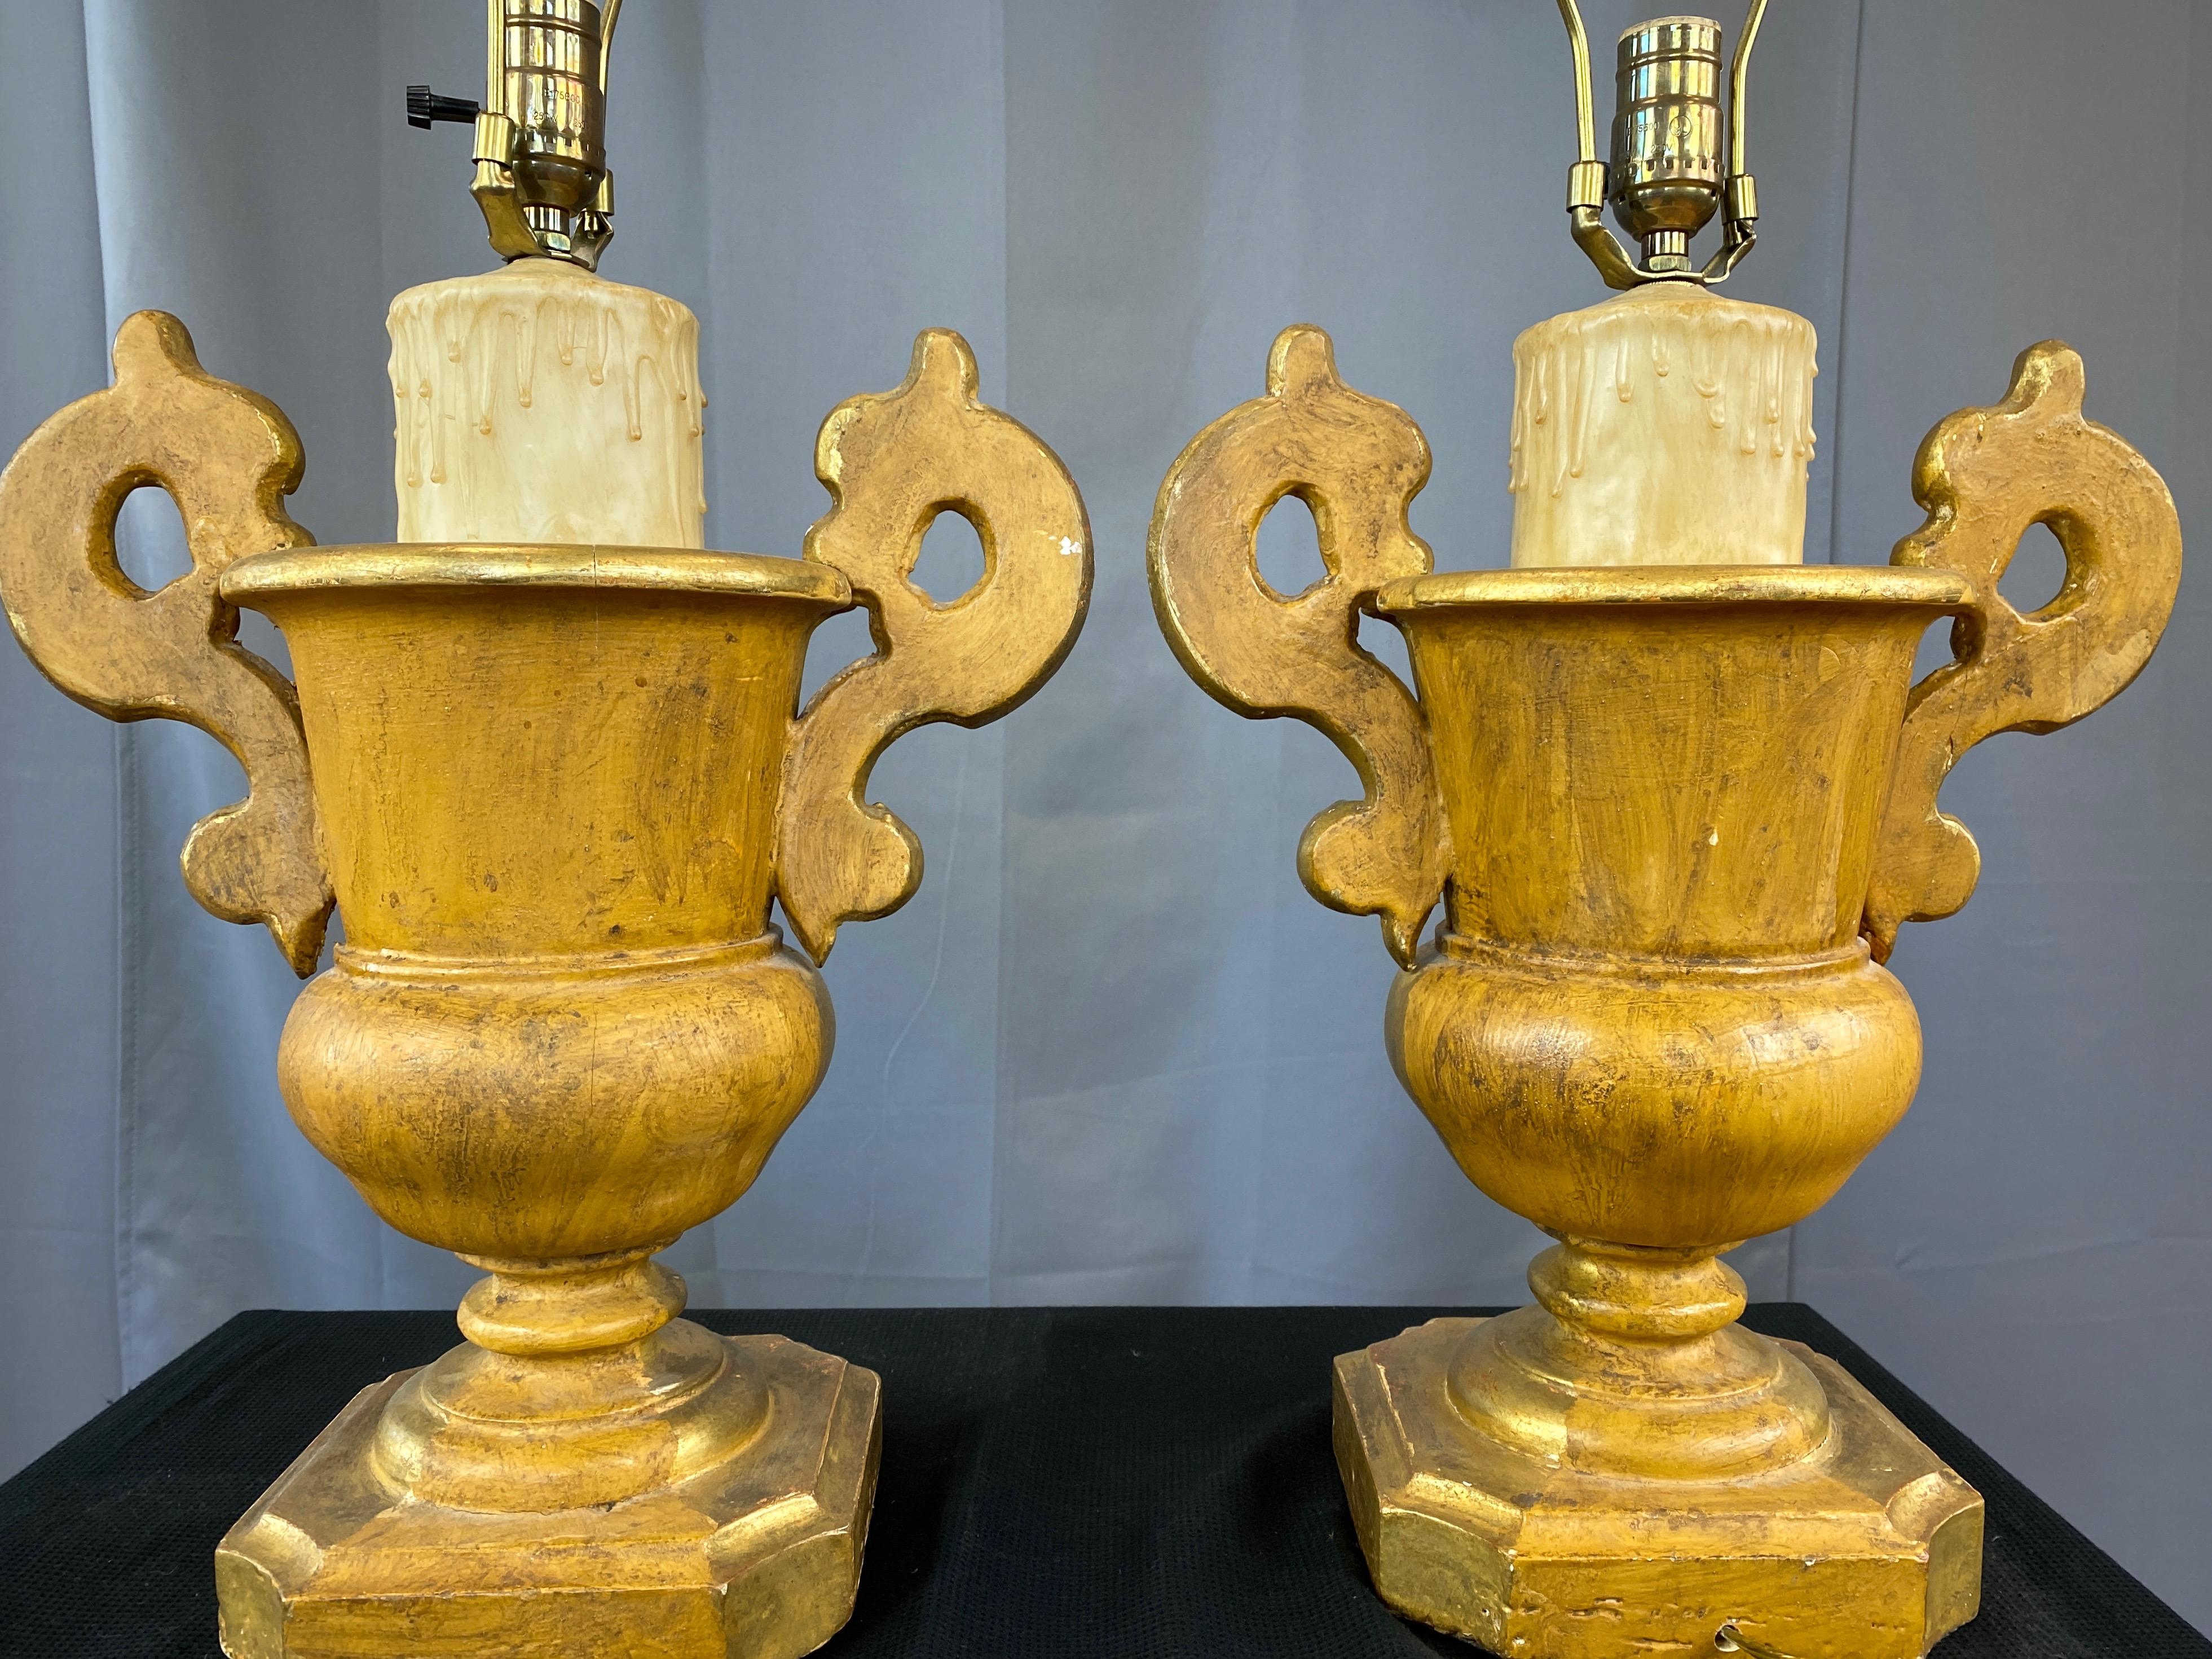 Pair of Italian Baroque Revival Giltwood Urn and Faux Candle Table Lamps, 1930s For Sale 1